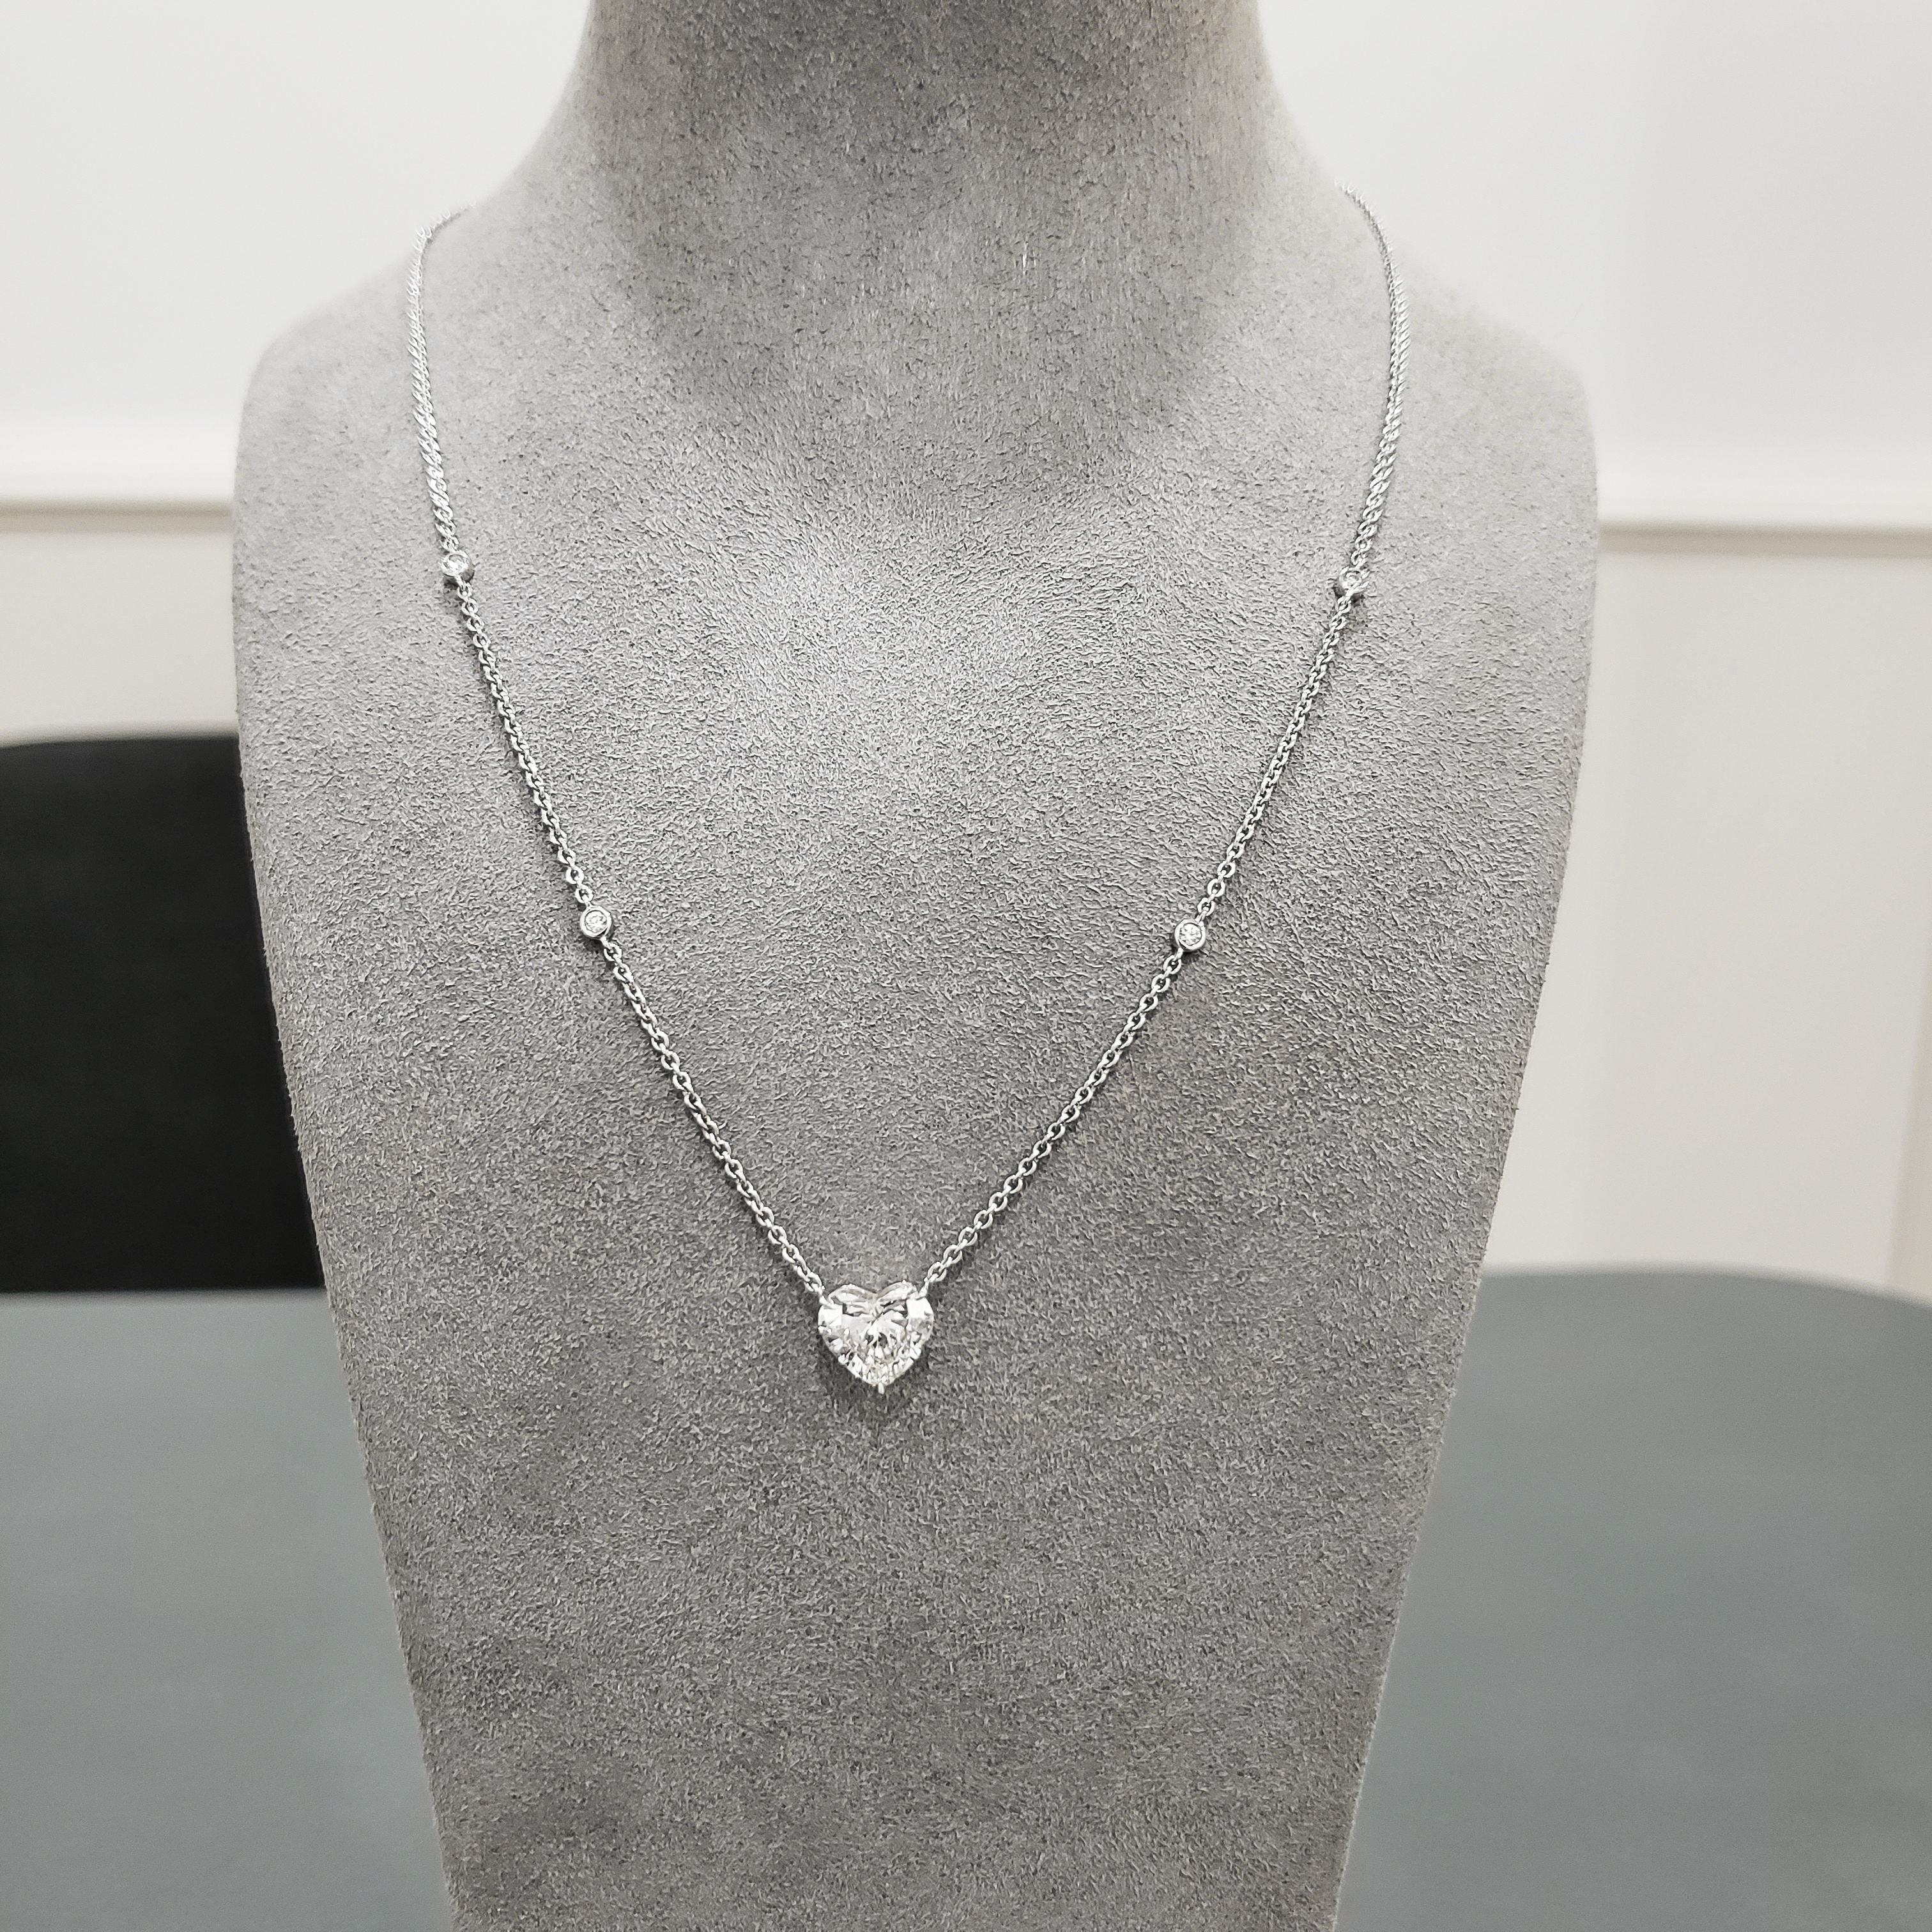 A unique solitaire pendant necklace showcasing a single heart shape diamond weighing 2.21 carats, suspended on a 16 inch white gold chain accented with four round brilliant diamonds. Accent diamonds weigh 0.17 carats total. 

Style available in